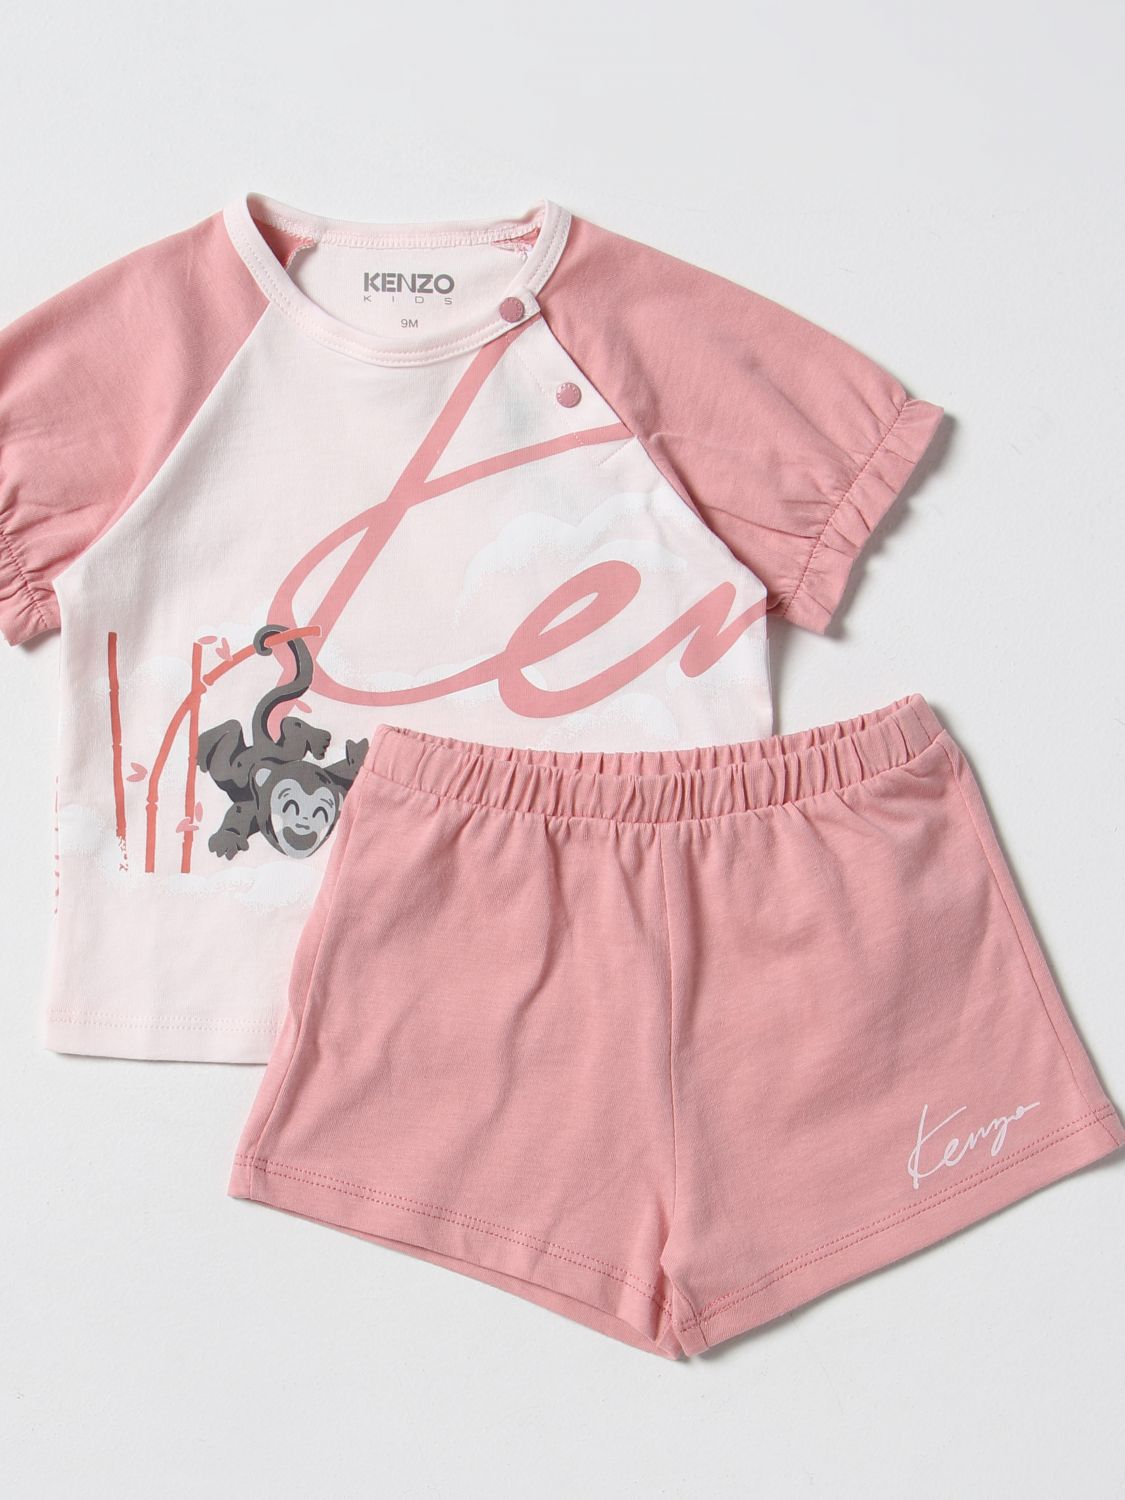 kenzo-kids-organic-jersey-cotton-t-shirt-and-shorts-outfit-k98092-48r